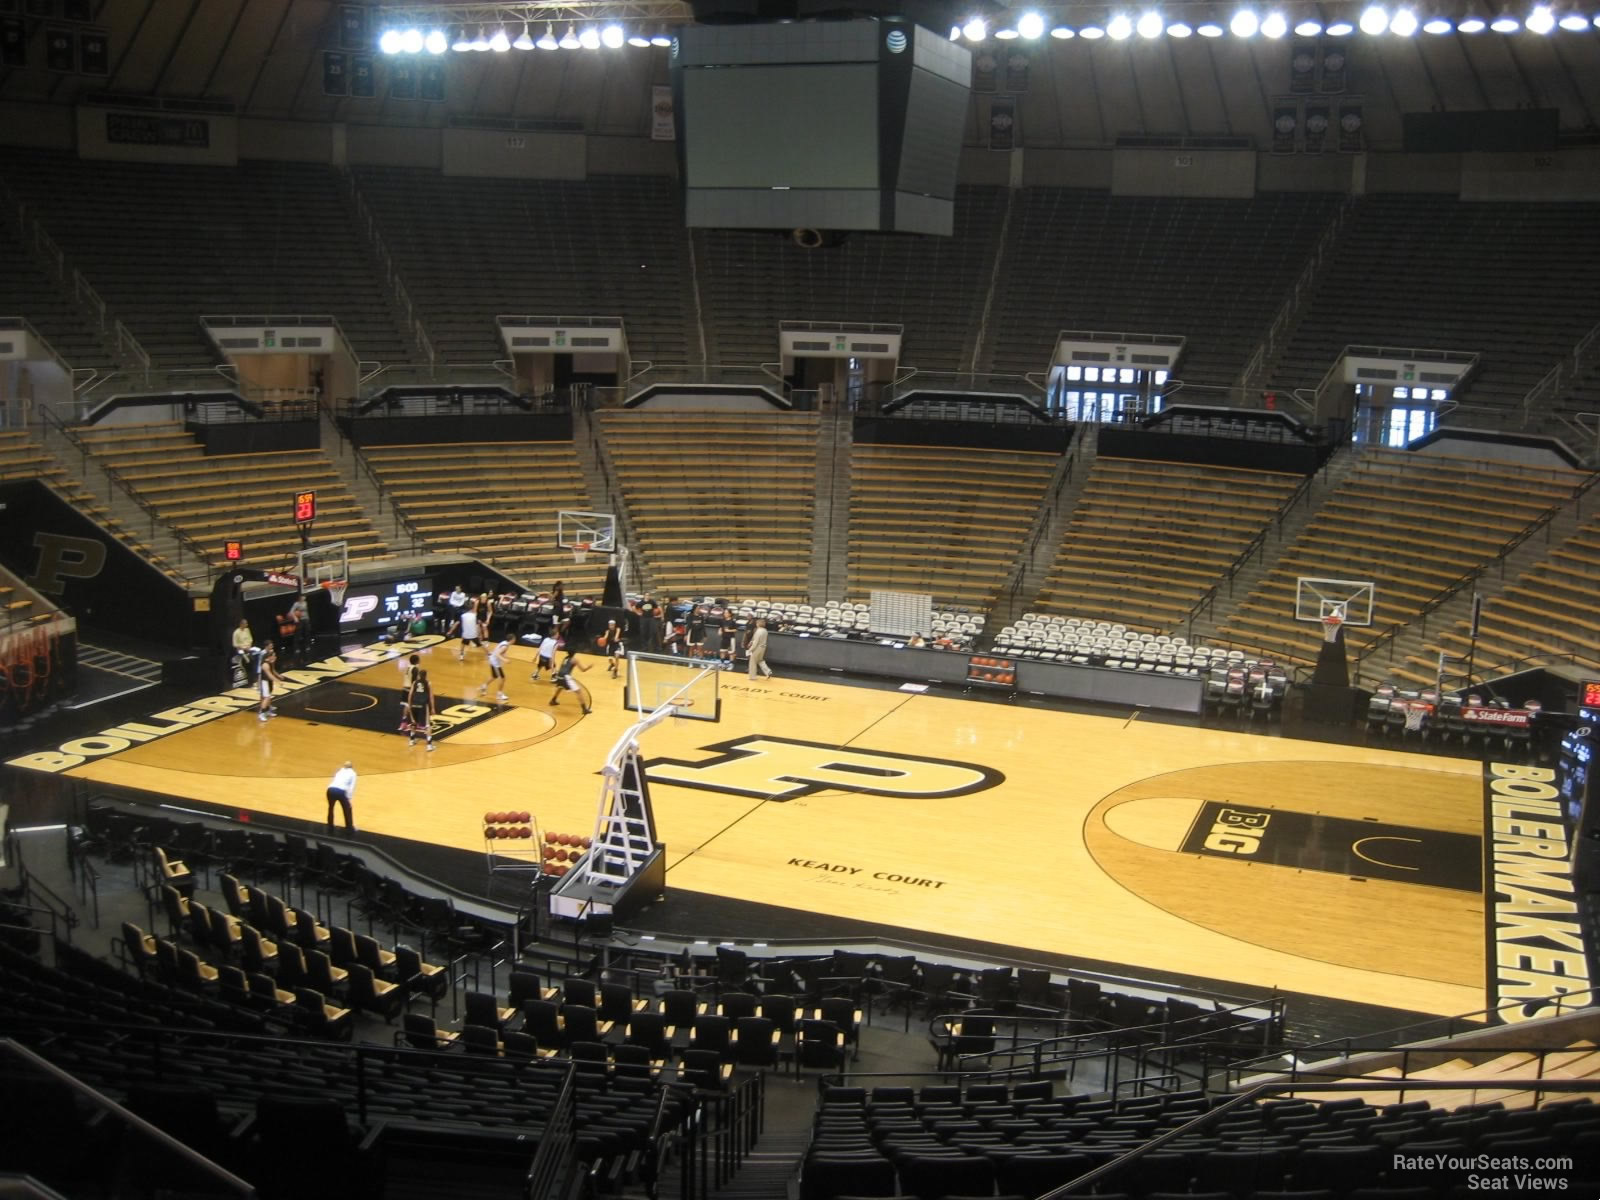 section 110, row 10 seat view  - mackey arena